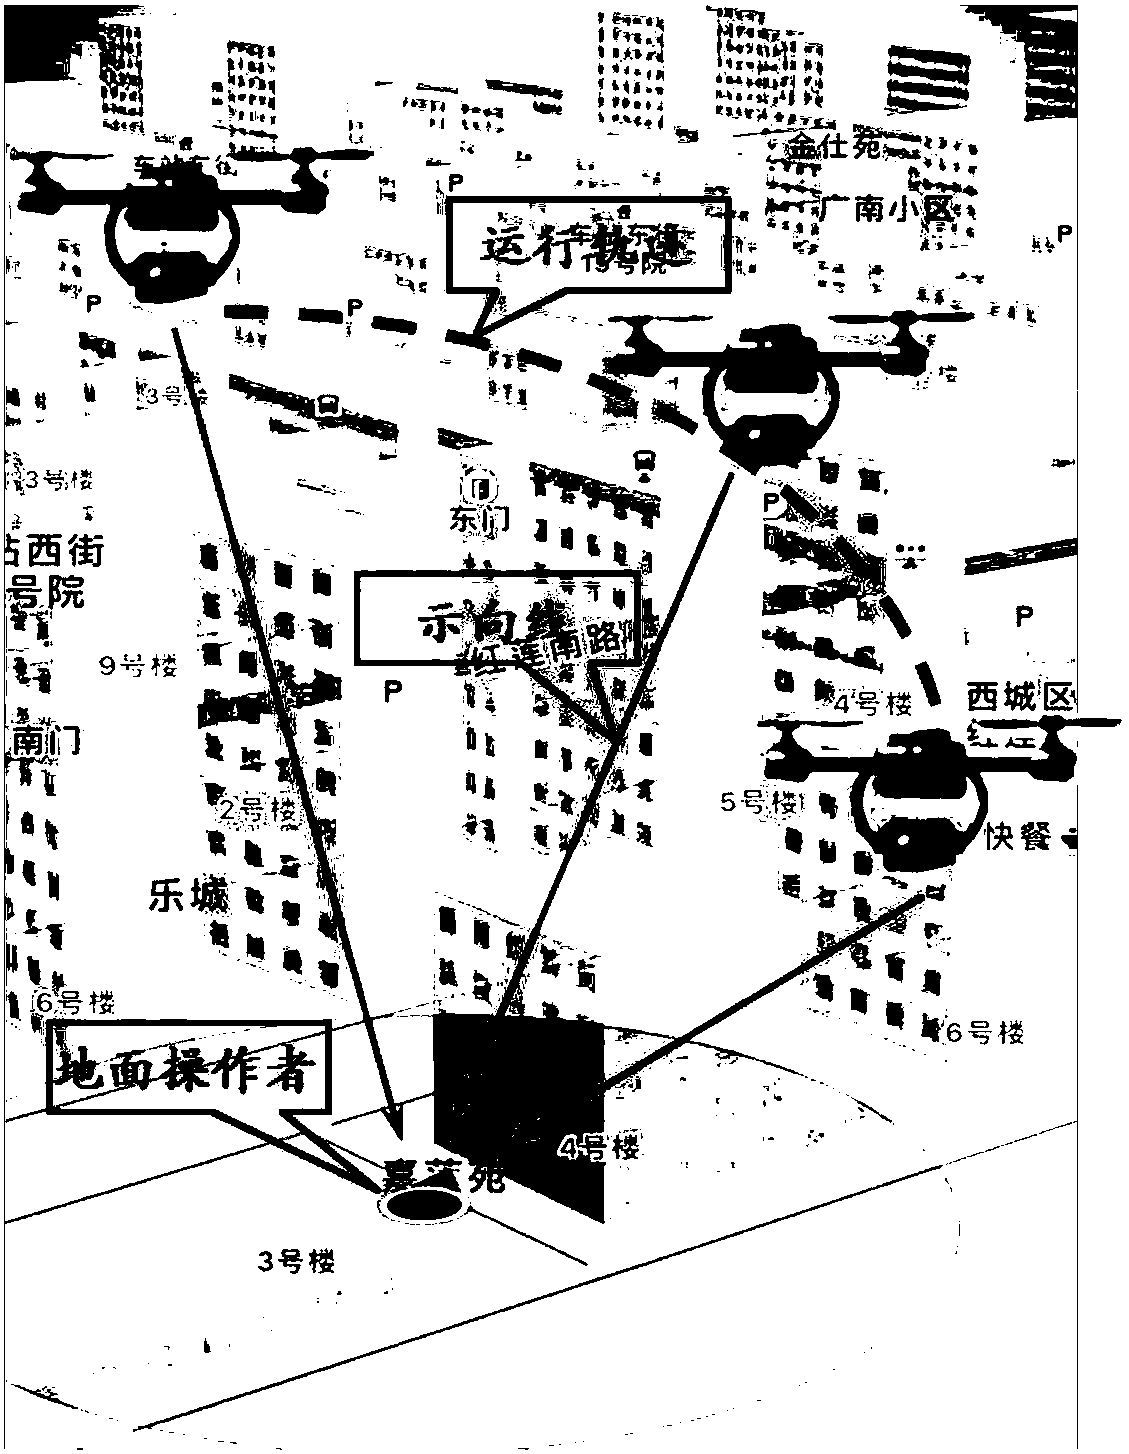 Unmanned aerial vehicle operator positioning system and method based on aerial radio monitoring platform